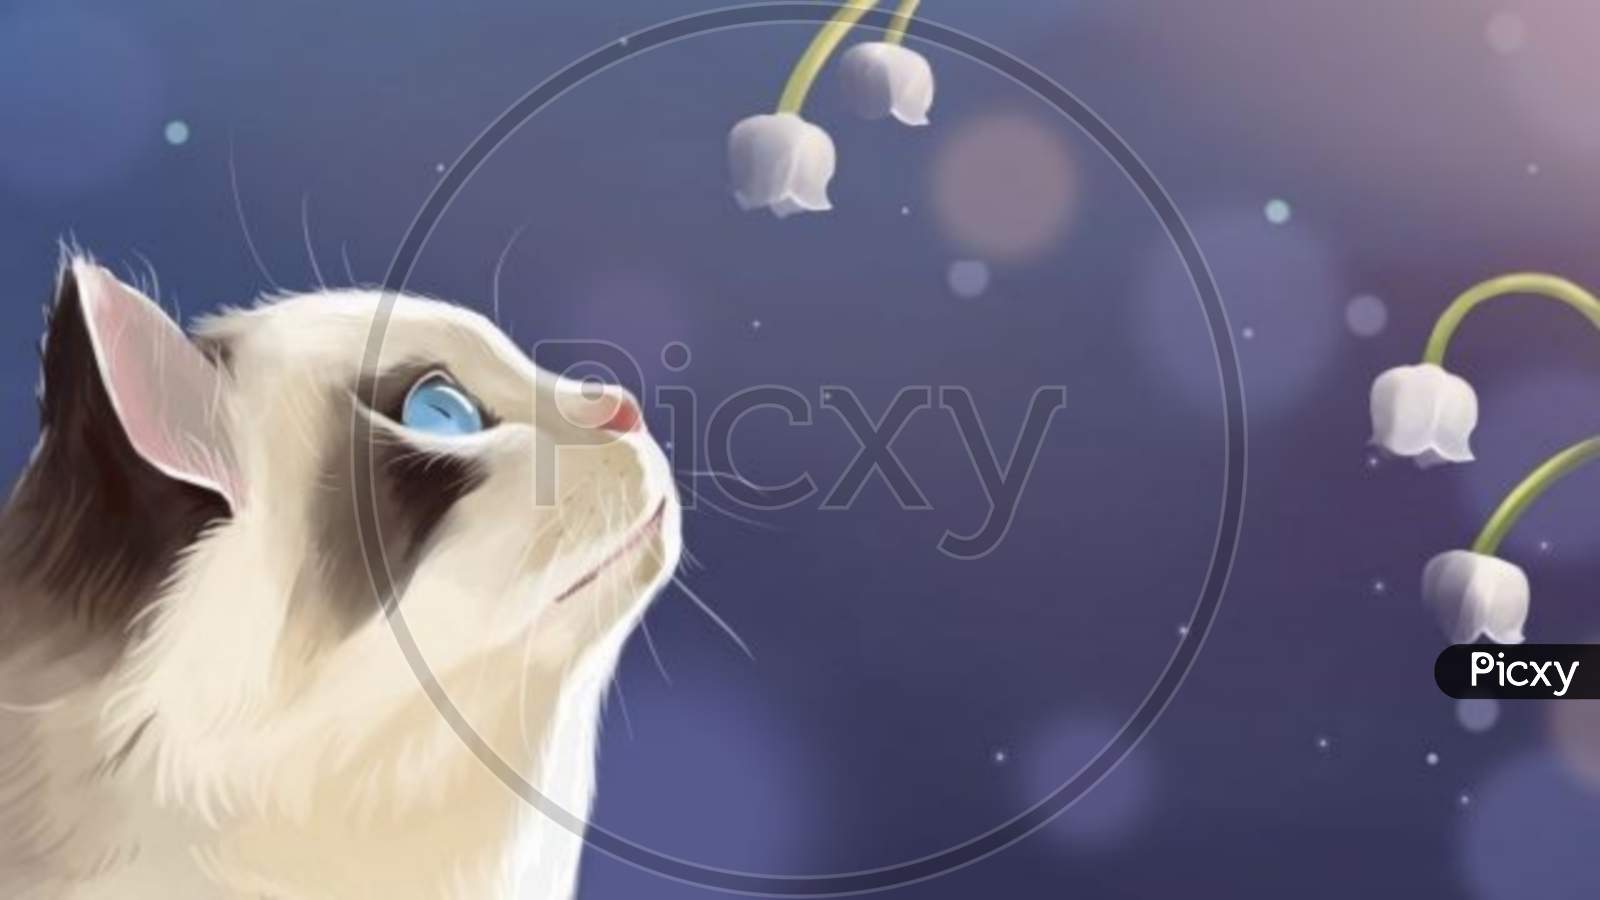 This amazing cat cute pet lily of the valley illustration image can be perfectly used as background or wallpaper, and can also be integrated into published media, like posters, flyers, books, etc.